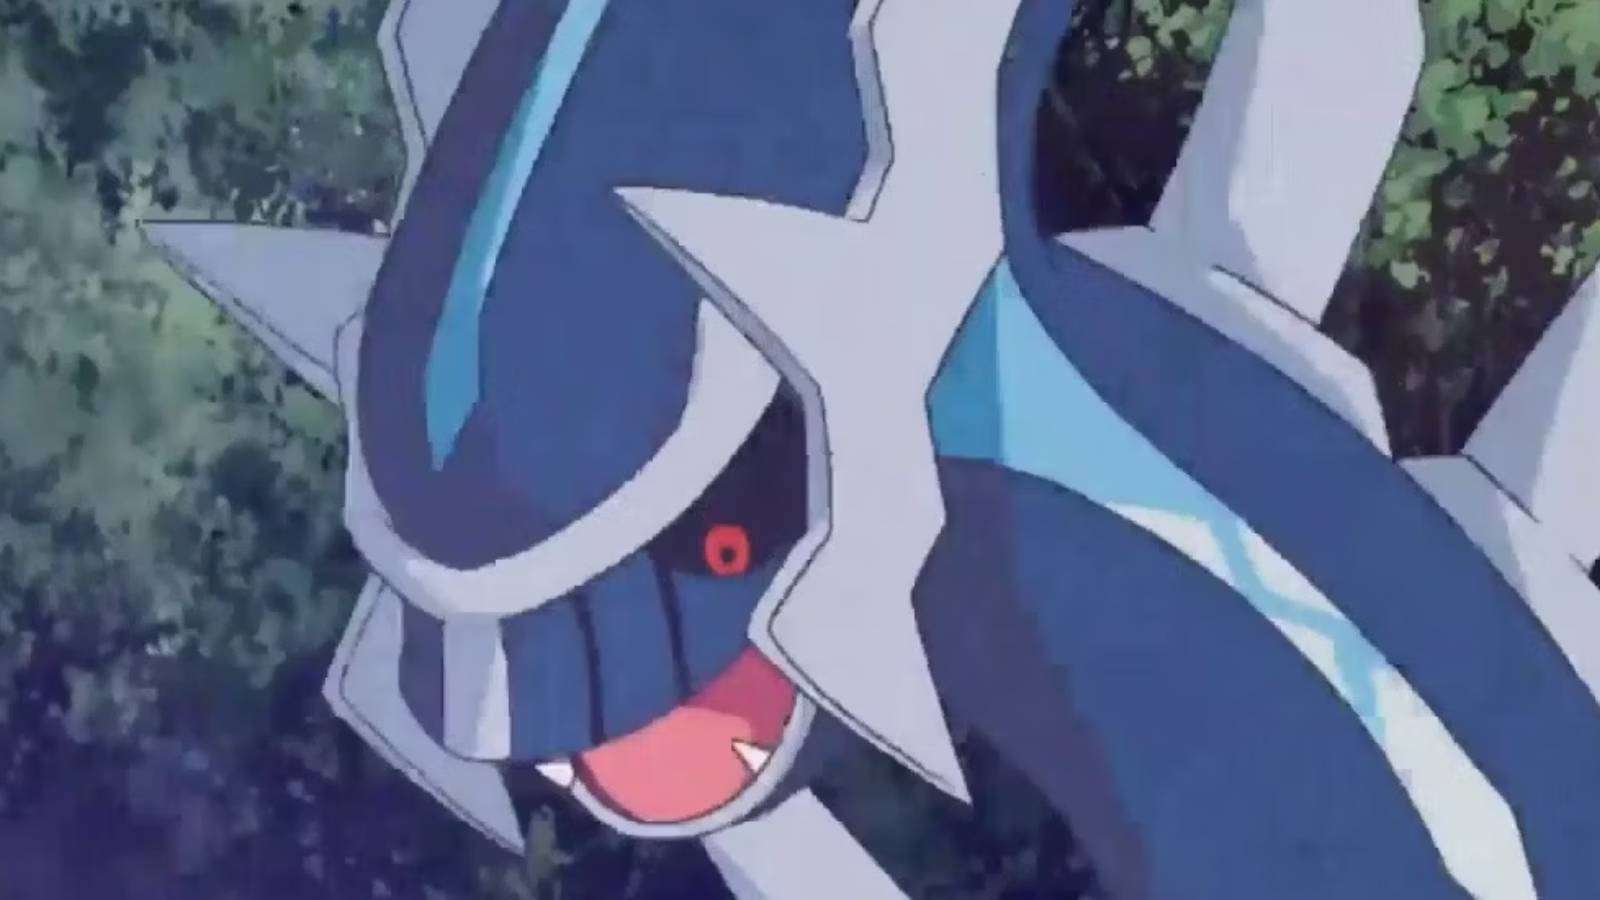 The Pokemon Dialga appears in a close up shot, looking bemused